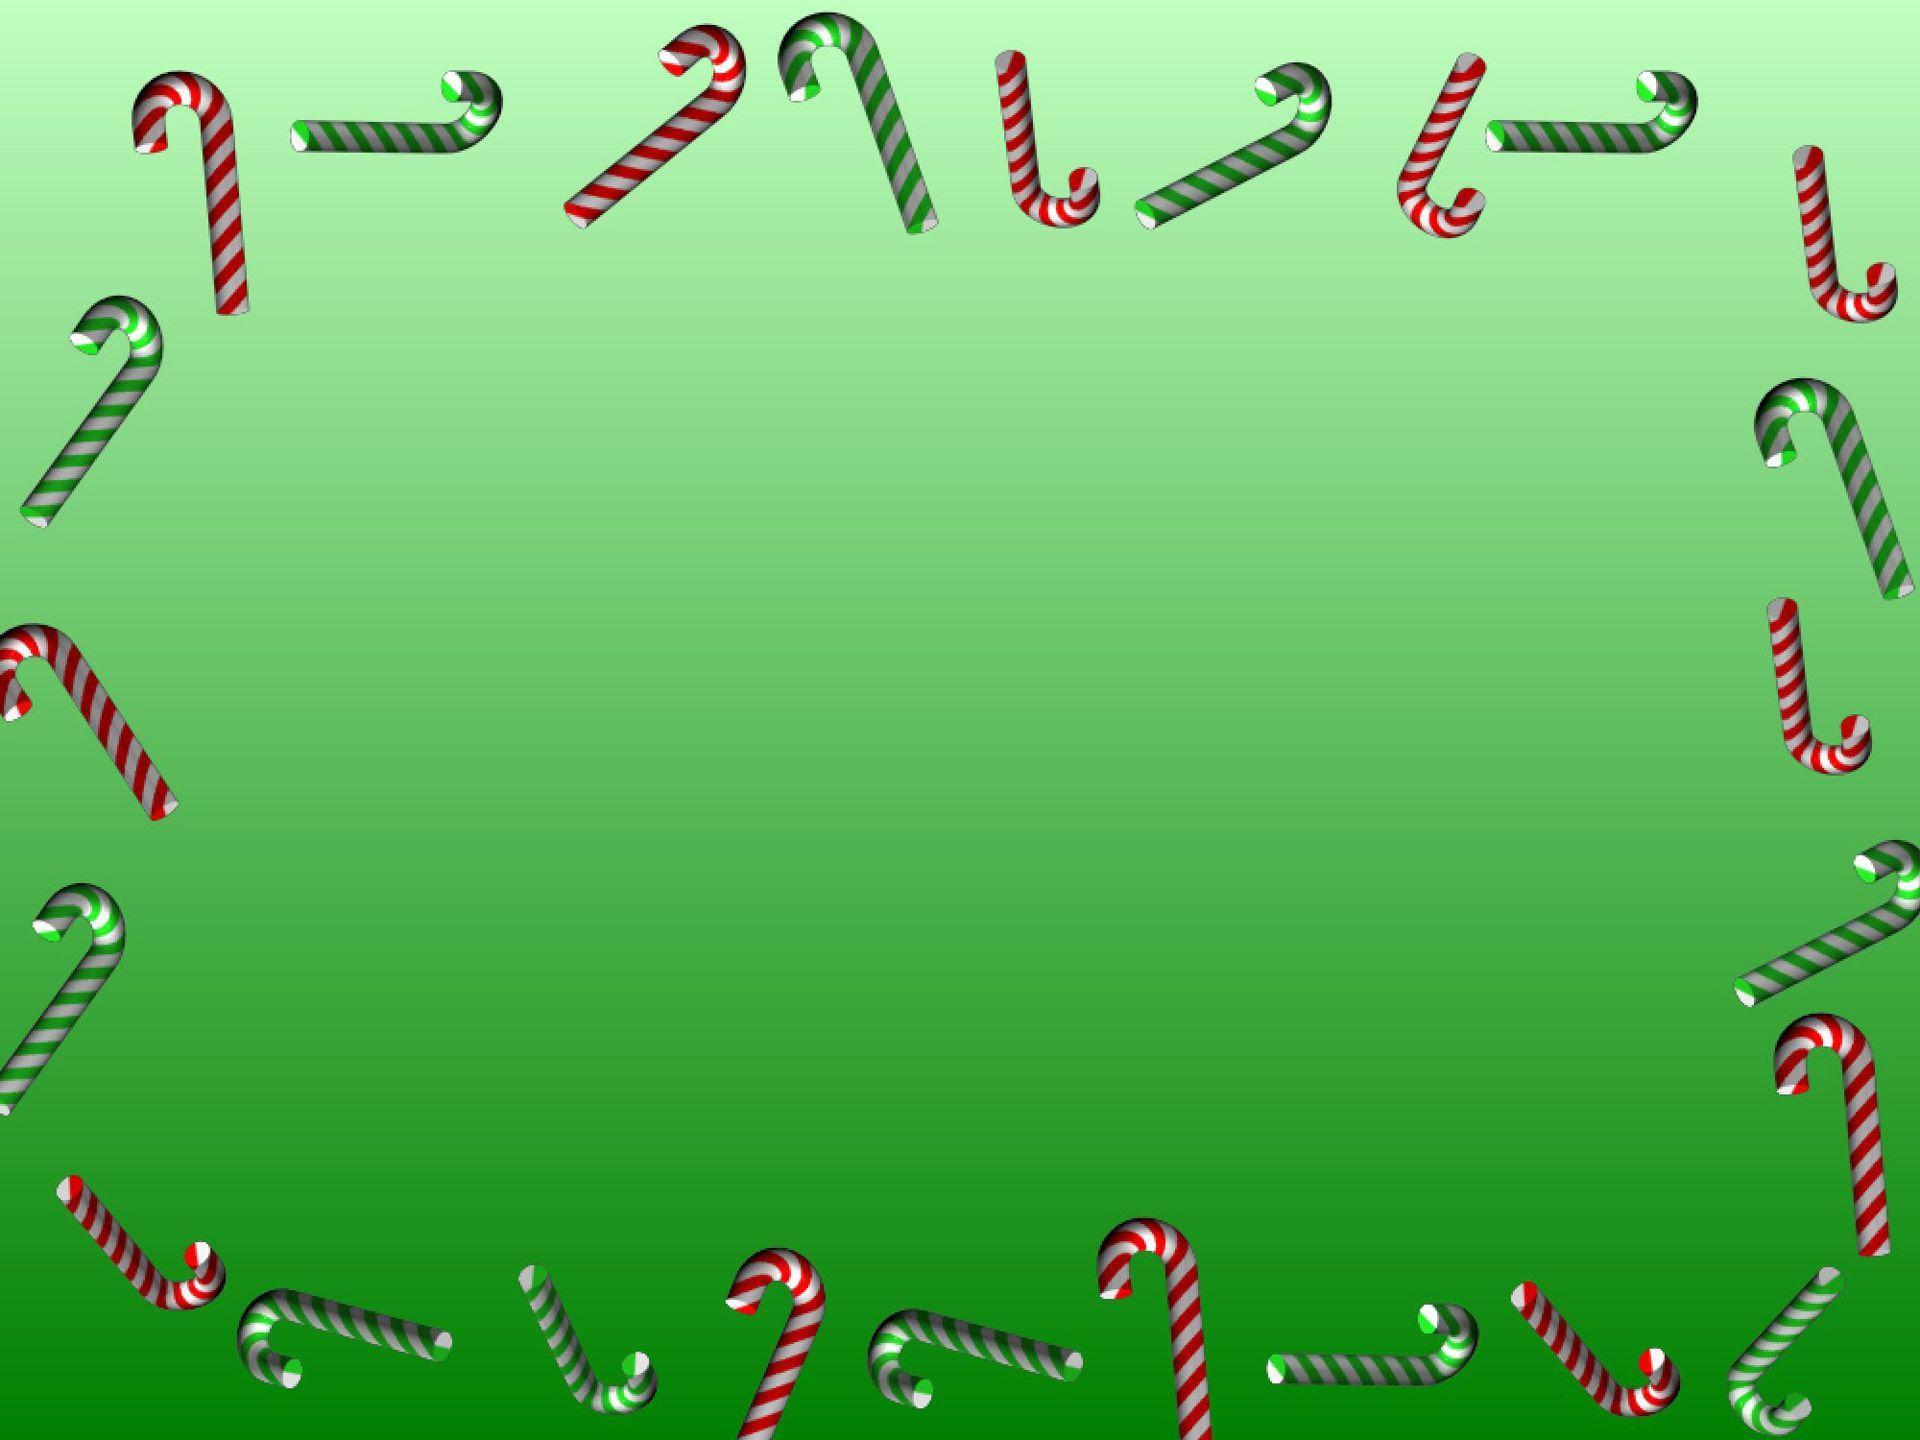 Collection of Candy Cane Image. Buy any image and use it for free